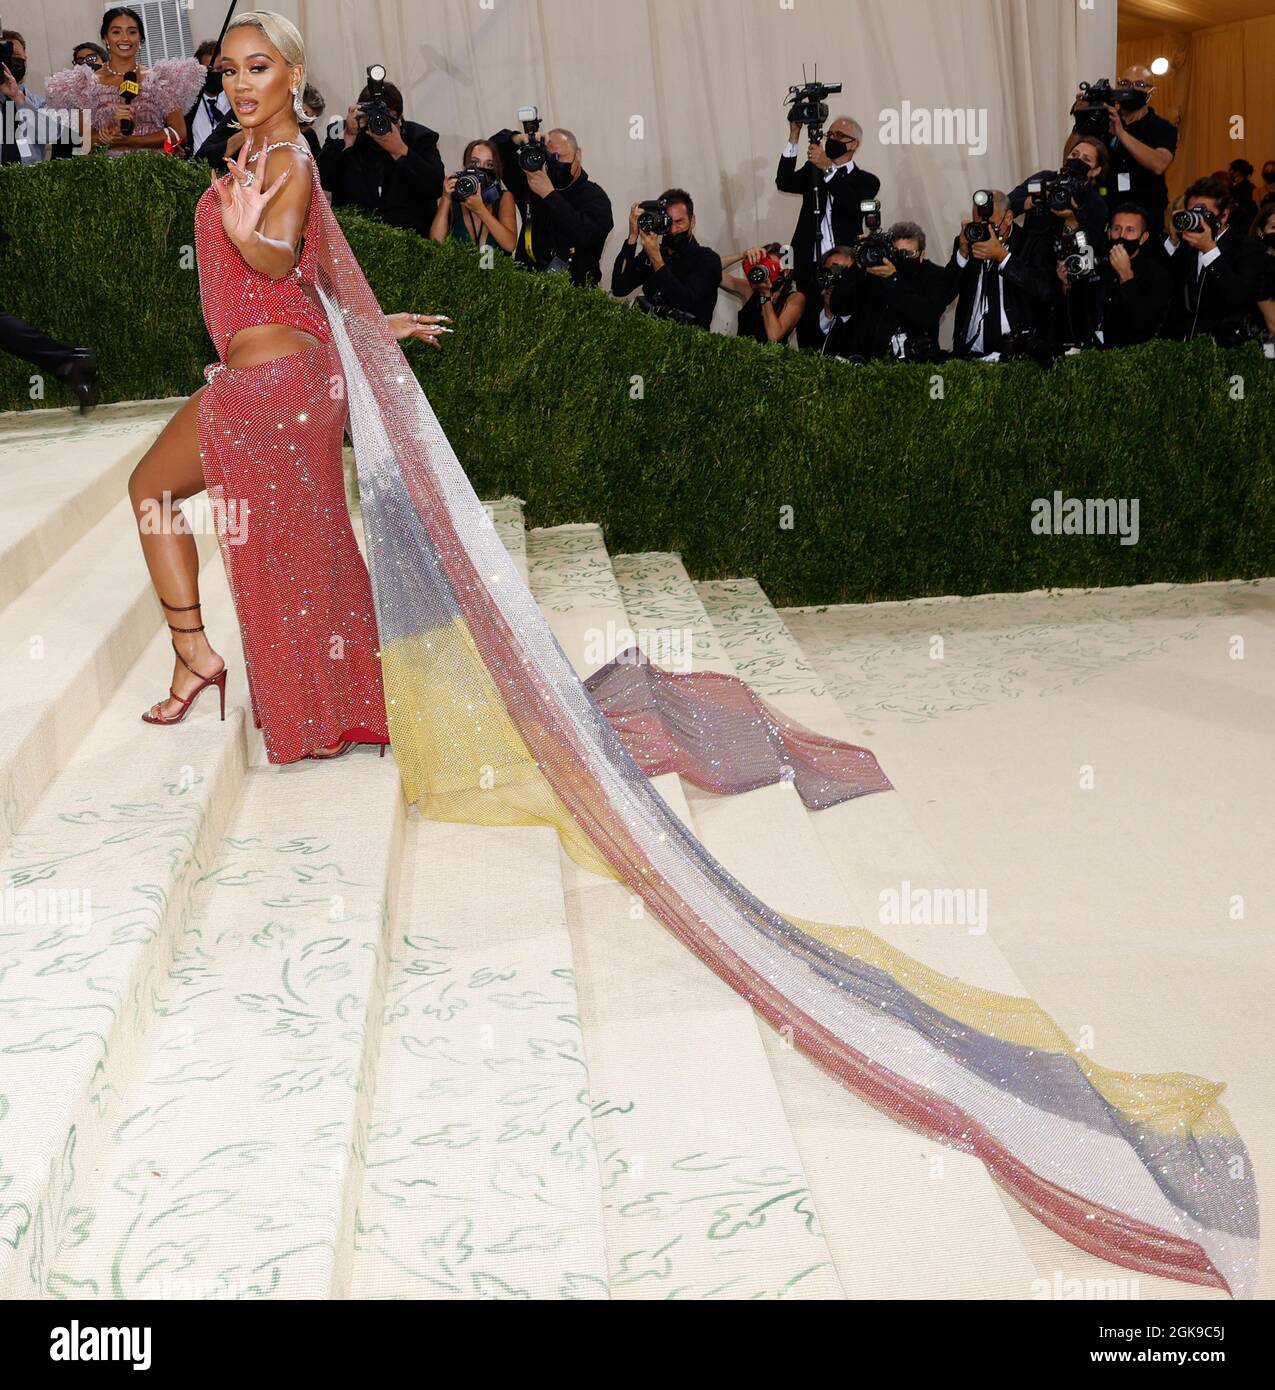 New York, United States. 13th Sep, 2021. Saweetie arrives for The Met Gala at The Metropolitan Museum of Art celebrating the opening of In America: A Lexicon of Fashion in New York City on Monday, September 13, 2021. Photo by John Angelillo/UPI Credit: UPI/Alamy Live News Stock Photo